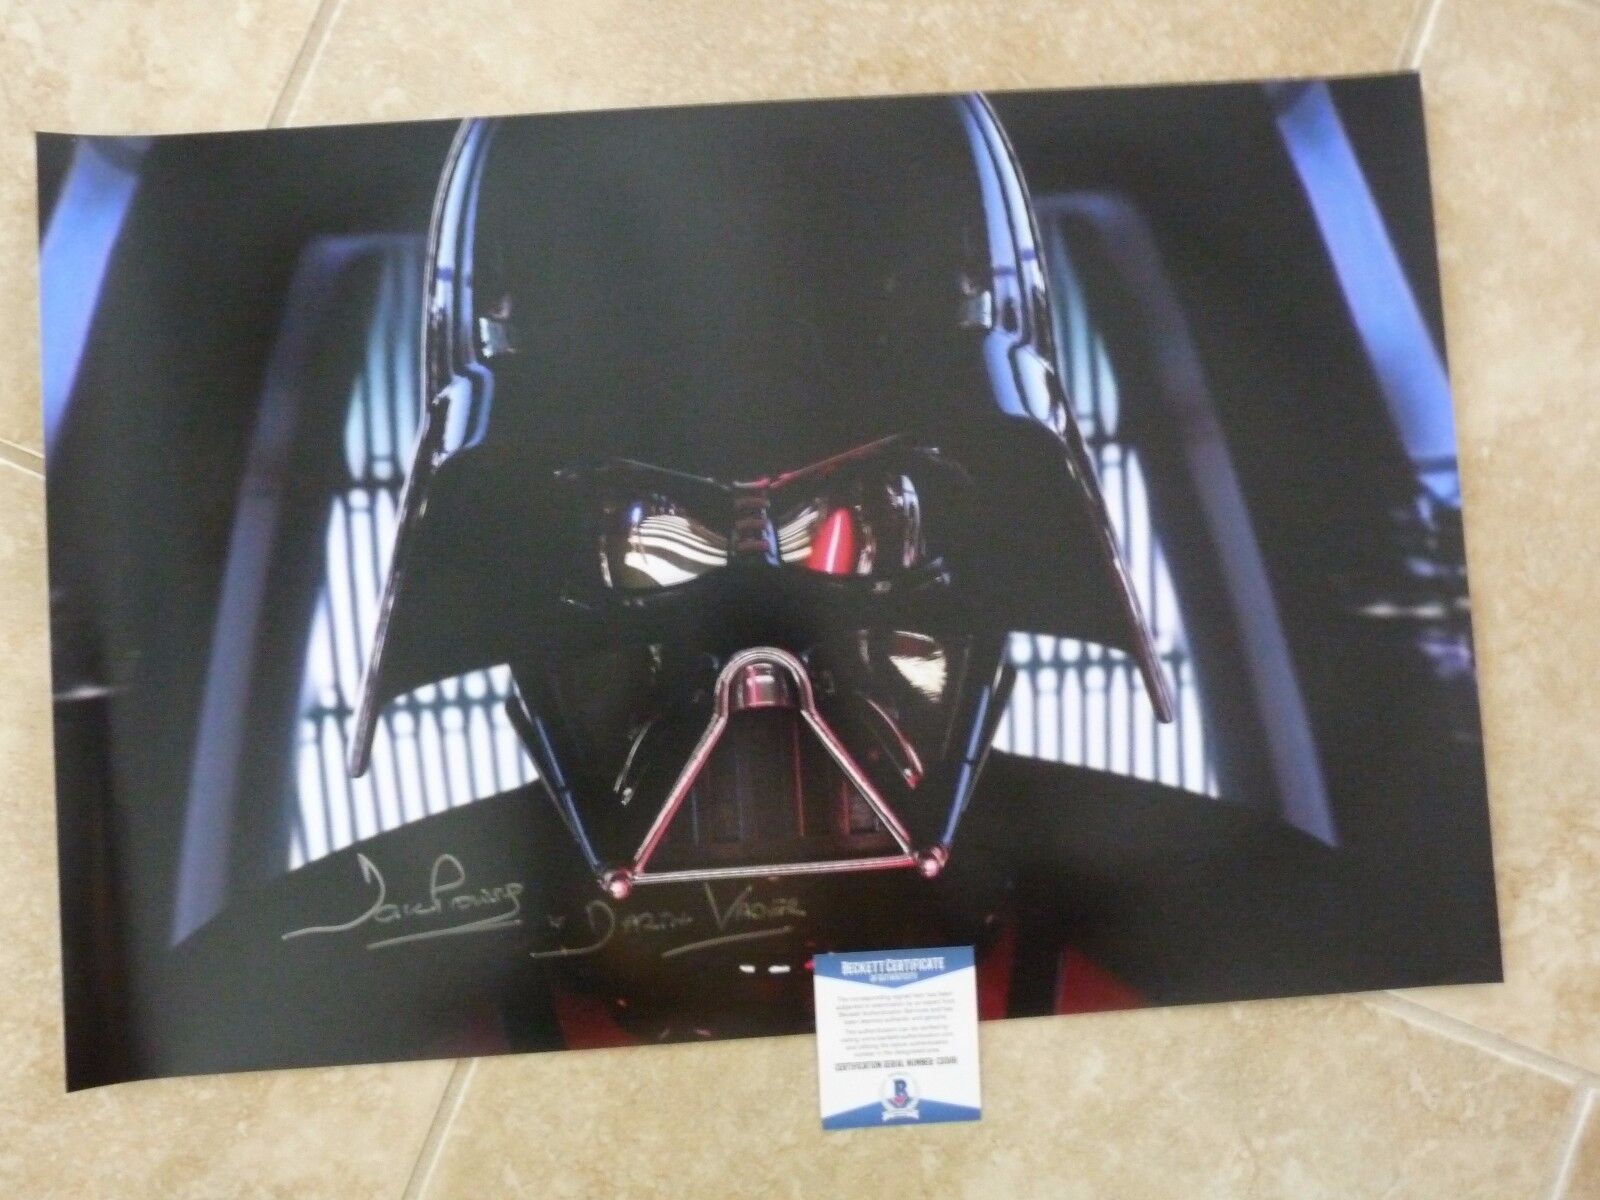 David Prowse Star Wars Darth Vader Signed 16x24 Photo Poster painting Beckett Certified #5